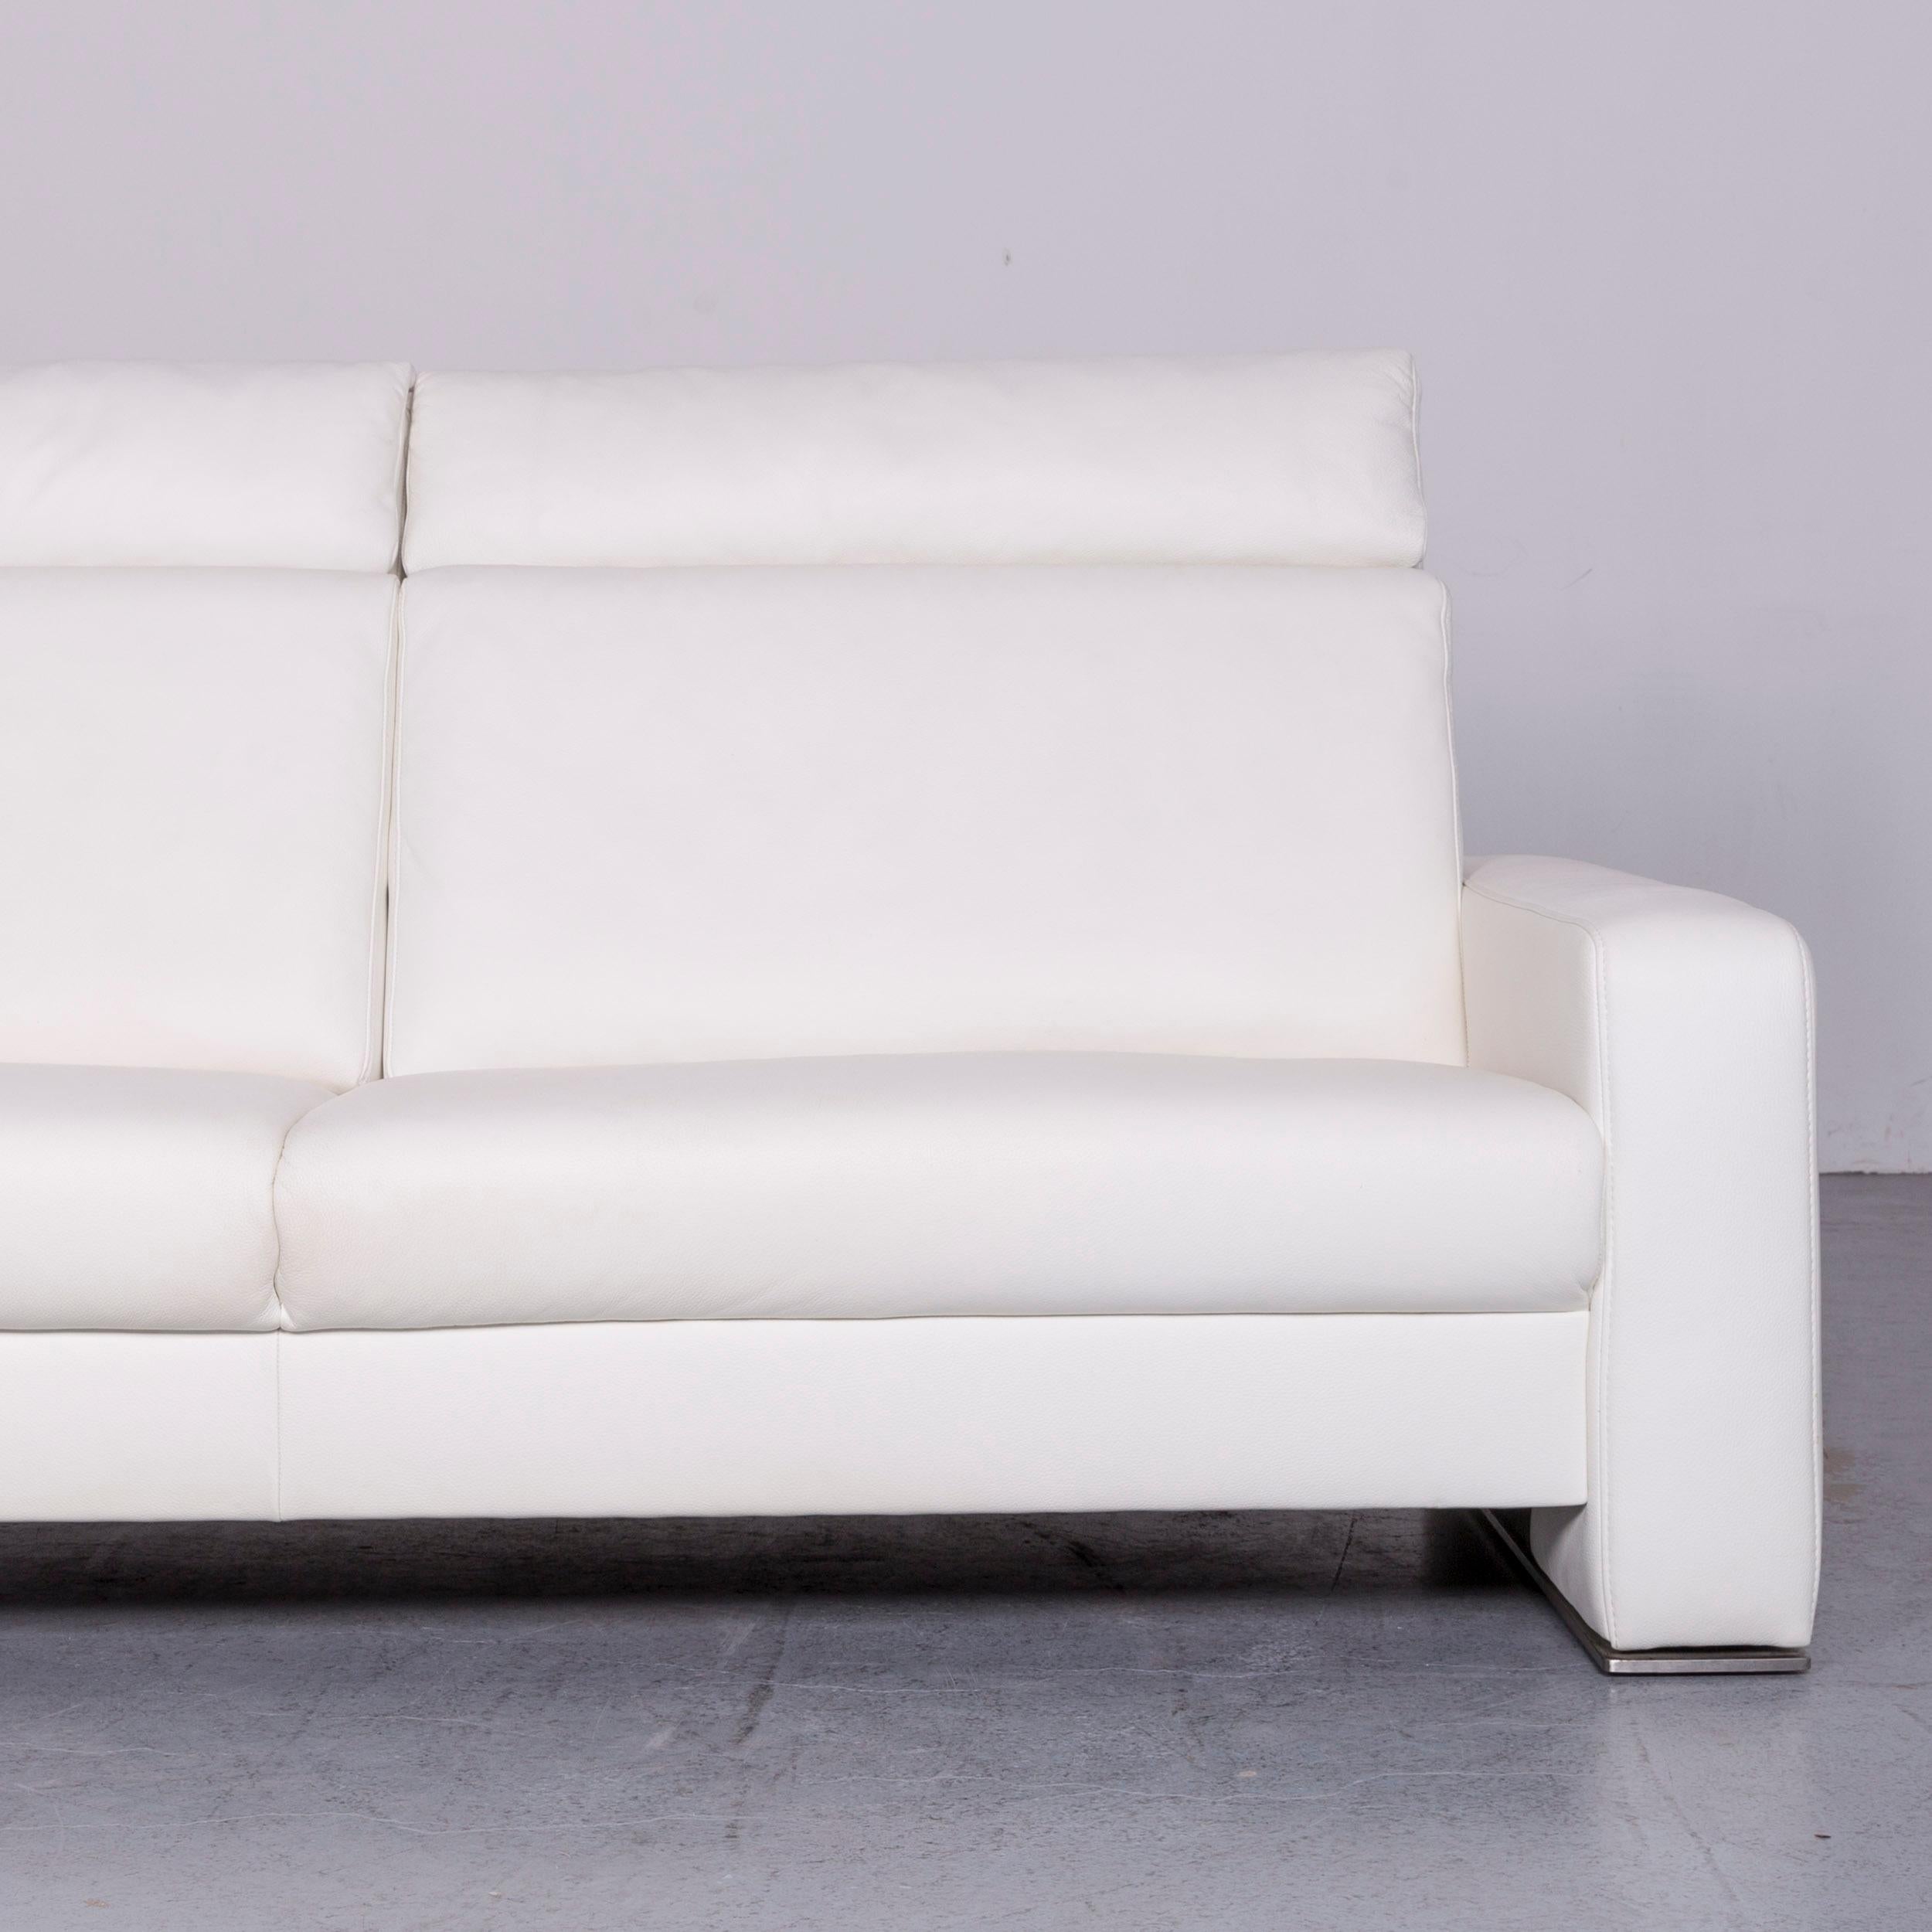 Joop! Designer Leather Sofa White Three-Seat Couch In Good Condition For Sale In Cologne, DE